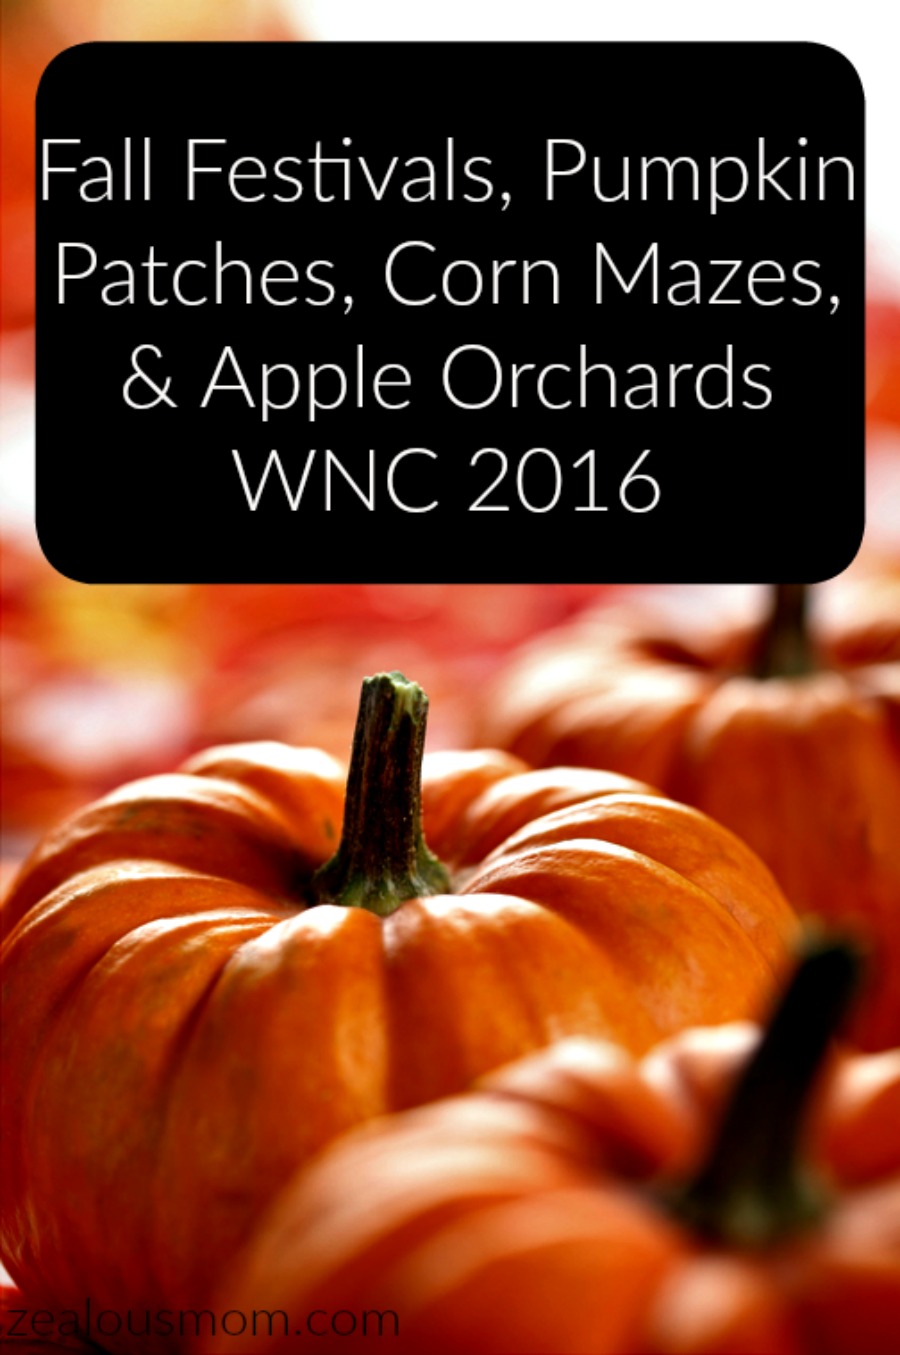 Pumpkin Patches, Apple Orchards, Corn Mazes, and Fall Festivals in WNC #Fall2016